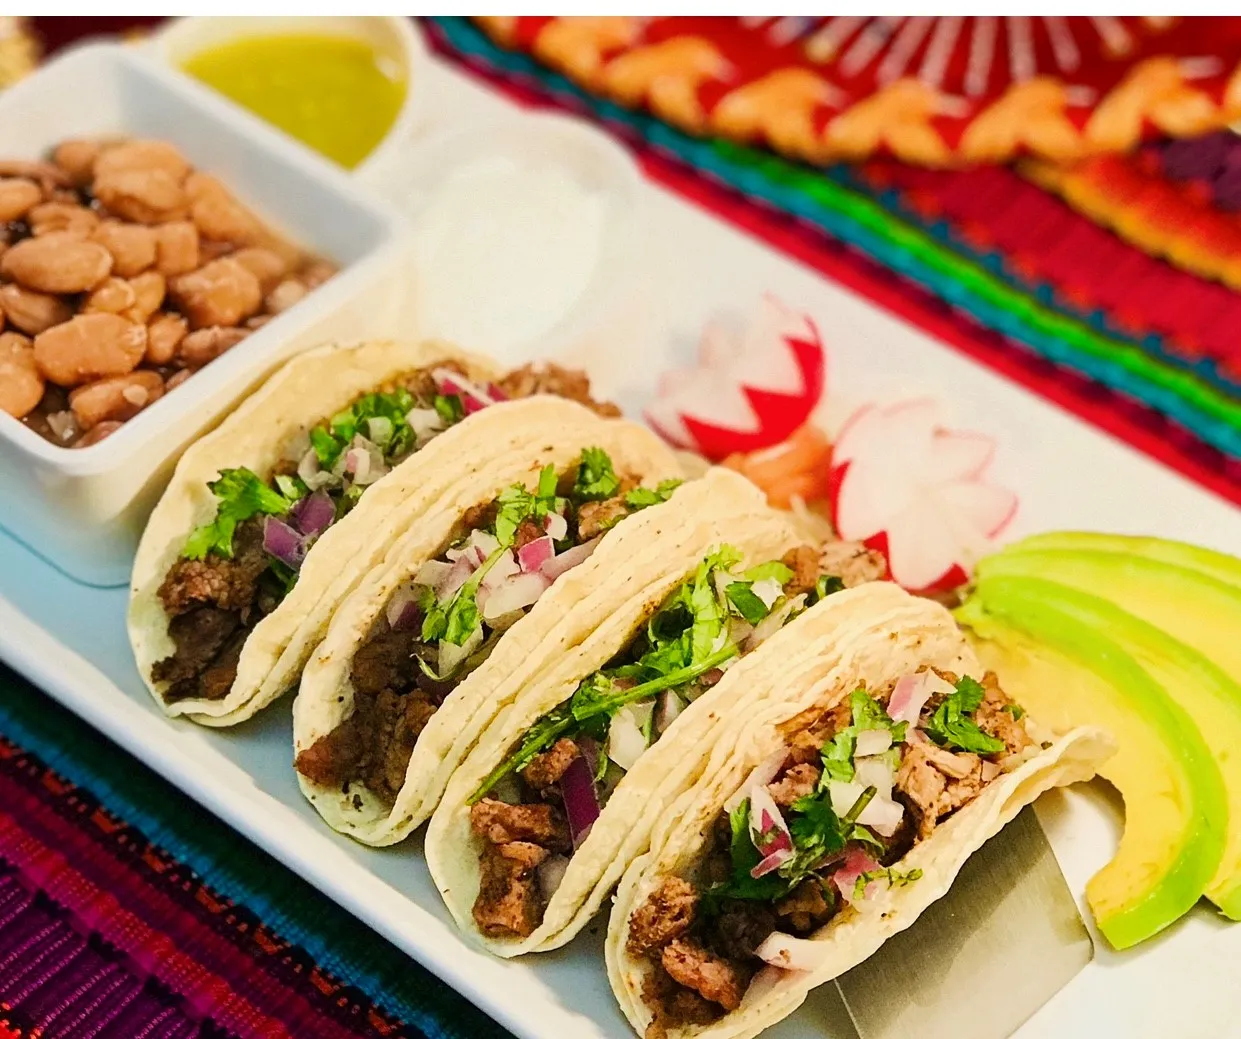 10 Best Tacos Las Cruces 2023 - Do Not Buy Before Reading This!